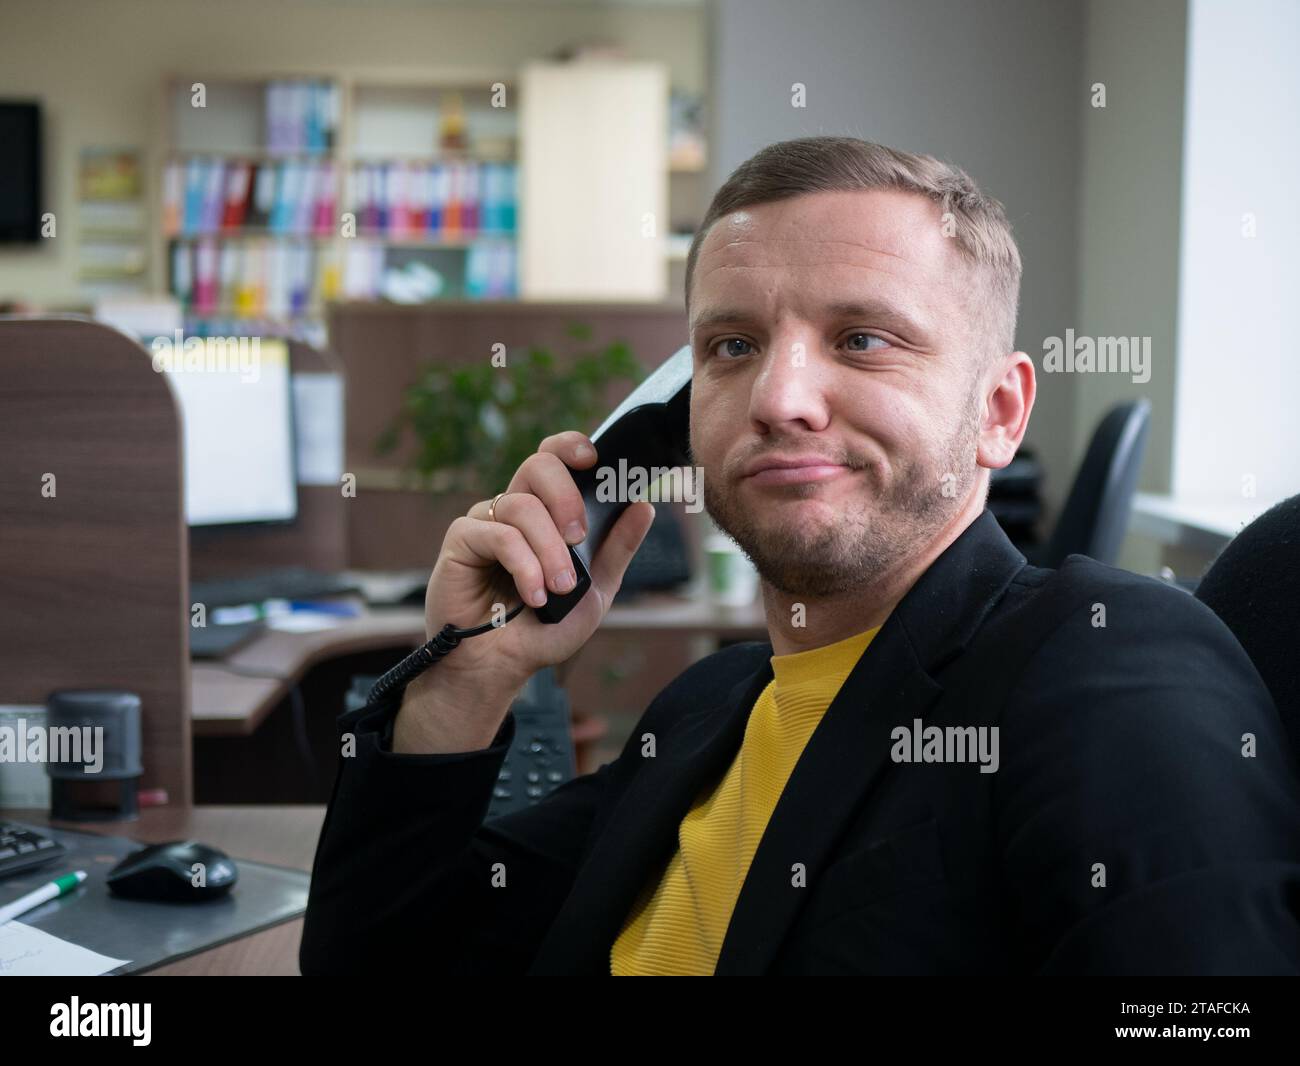 Person is working too hard, his face displays sign of exhaustion, selective focus. Midlife man sitting in the office and talking on the phone Stock Photo